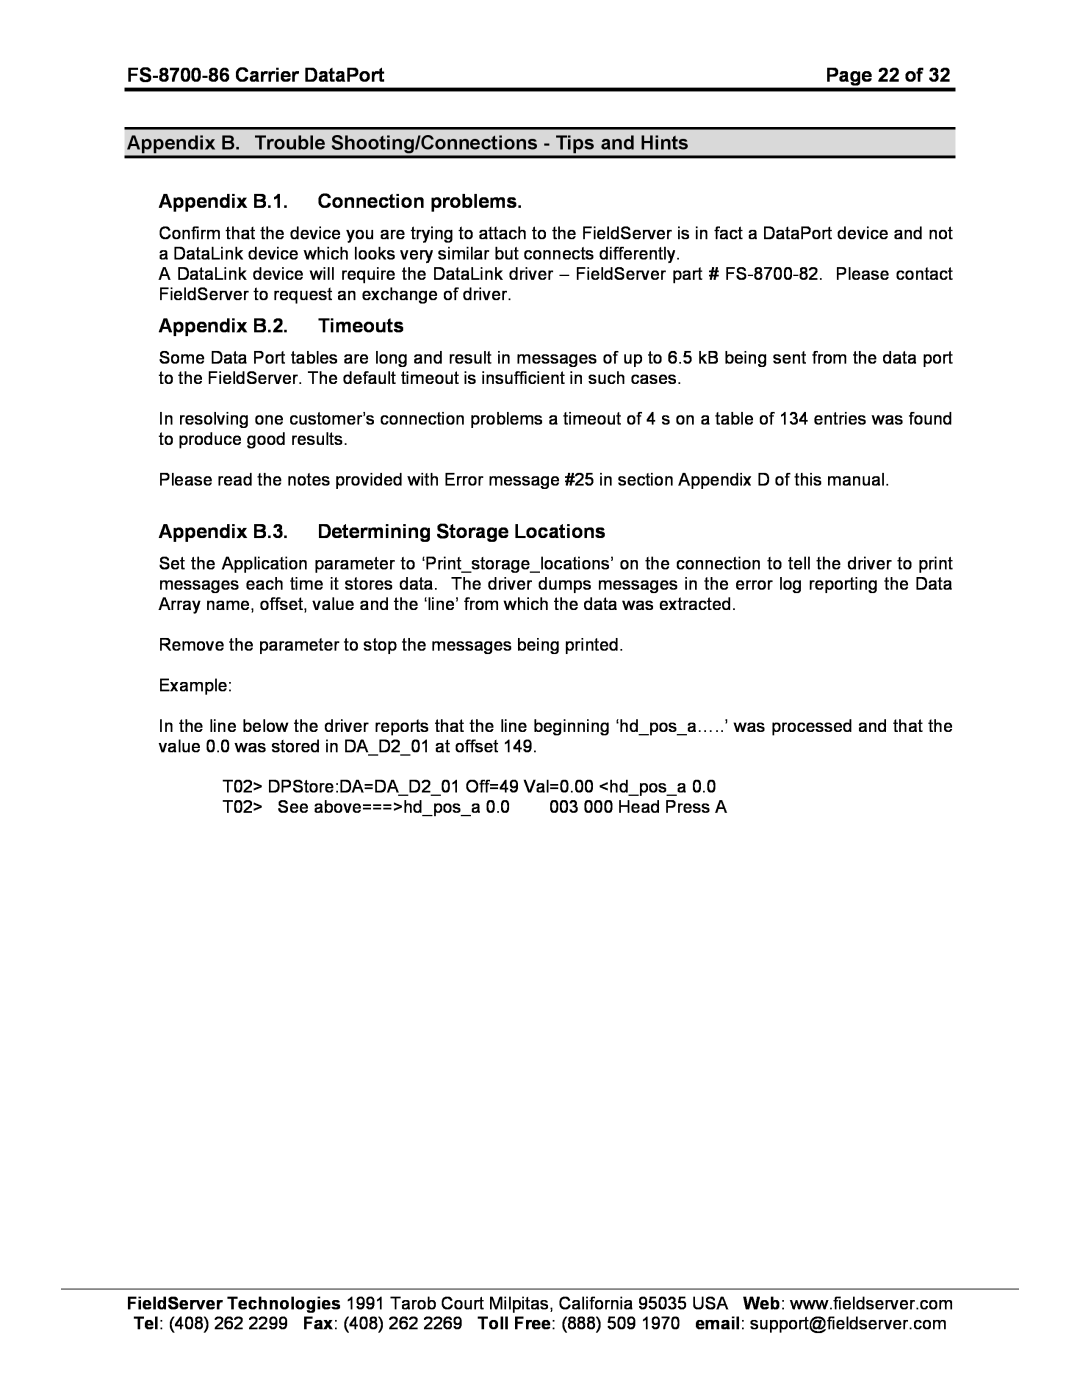 FieldServer FS-8700-86 Page 22 of, Appendix B. Trouble Shooting/Connections - Tips and Hints, Appendix B.2. Timeouts 